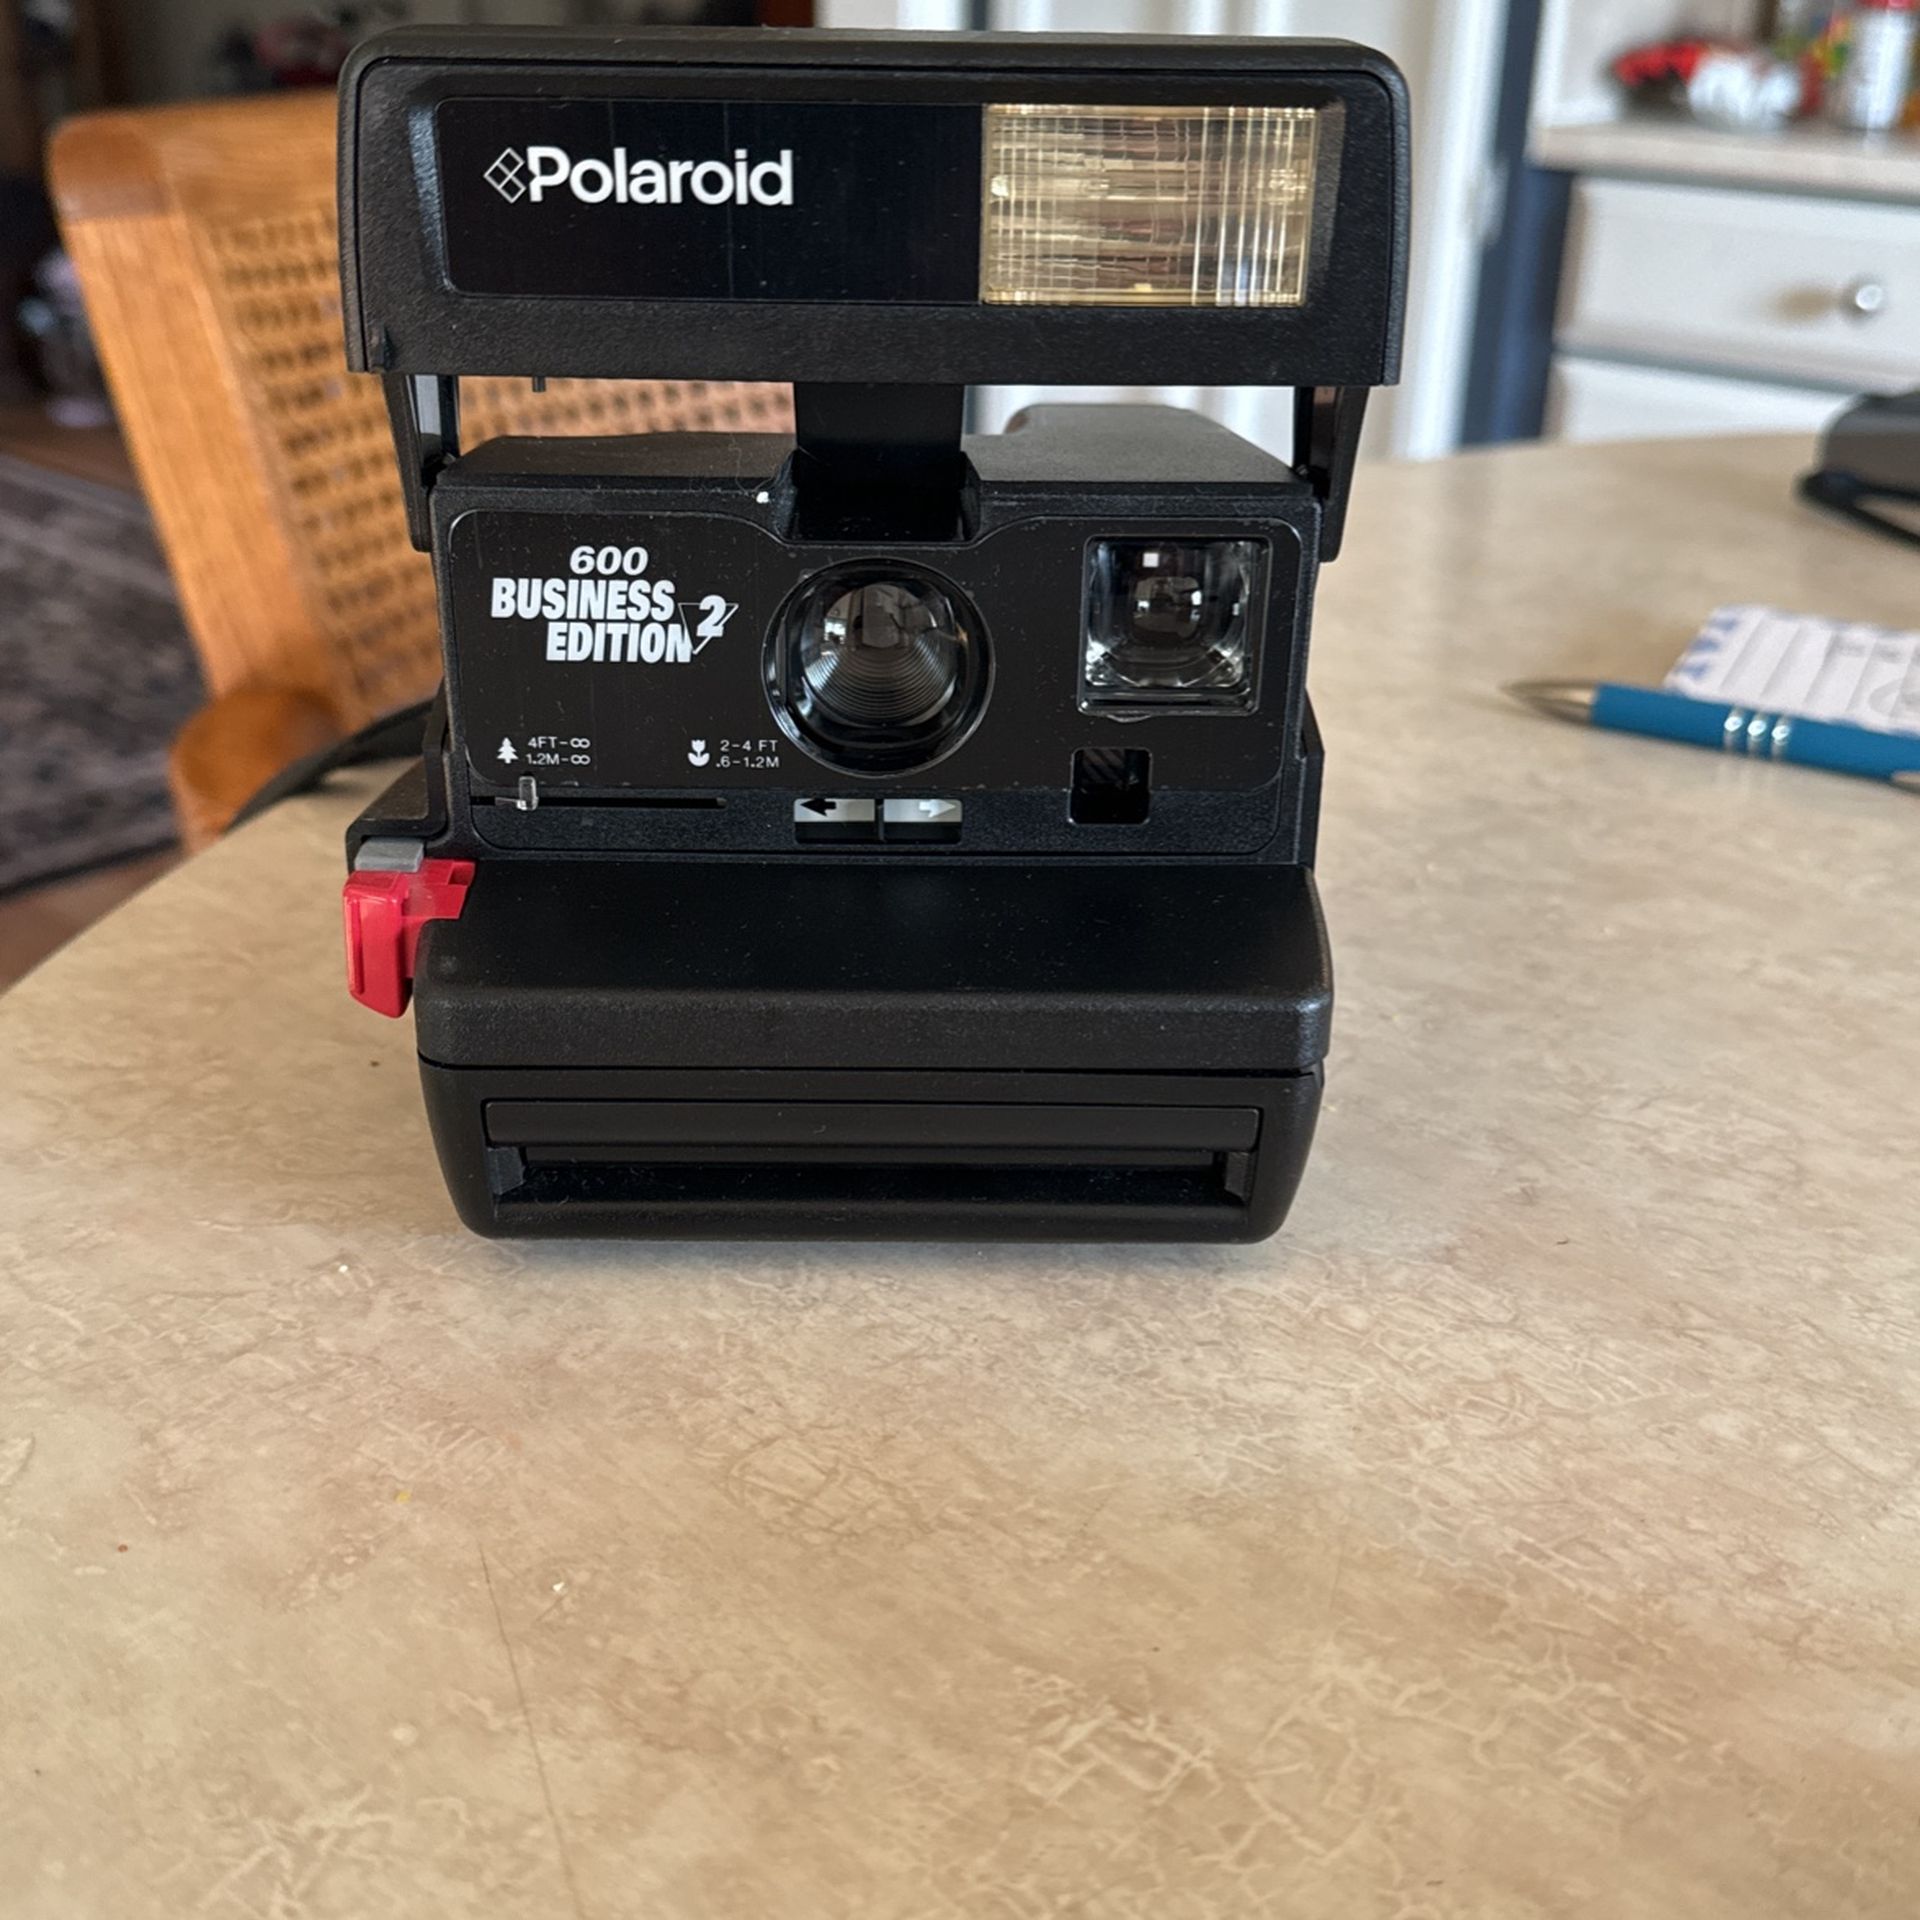 Poloroid 600 Business Edition Camera